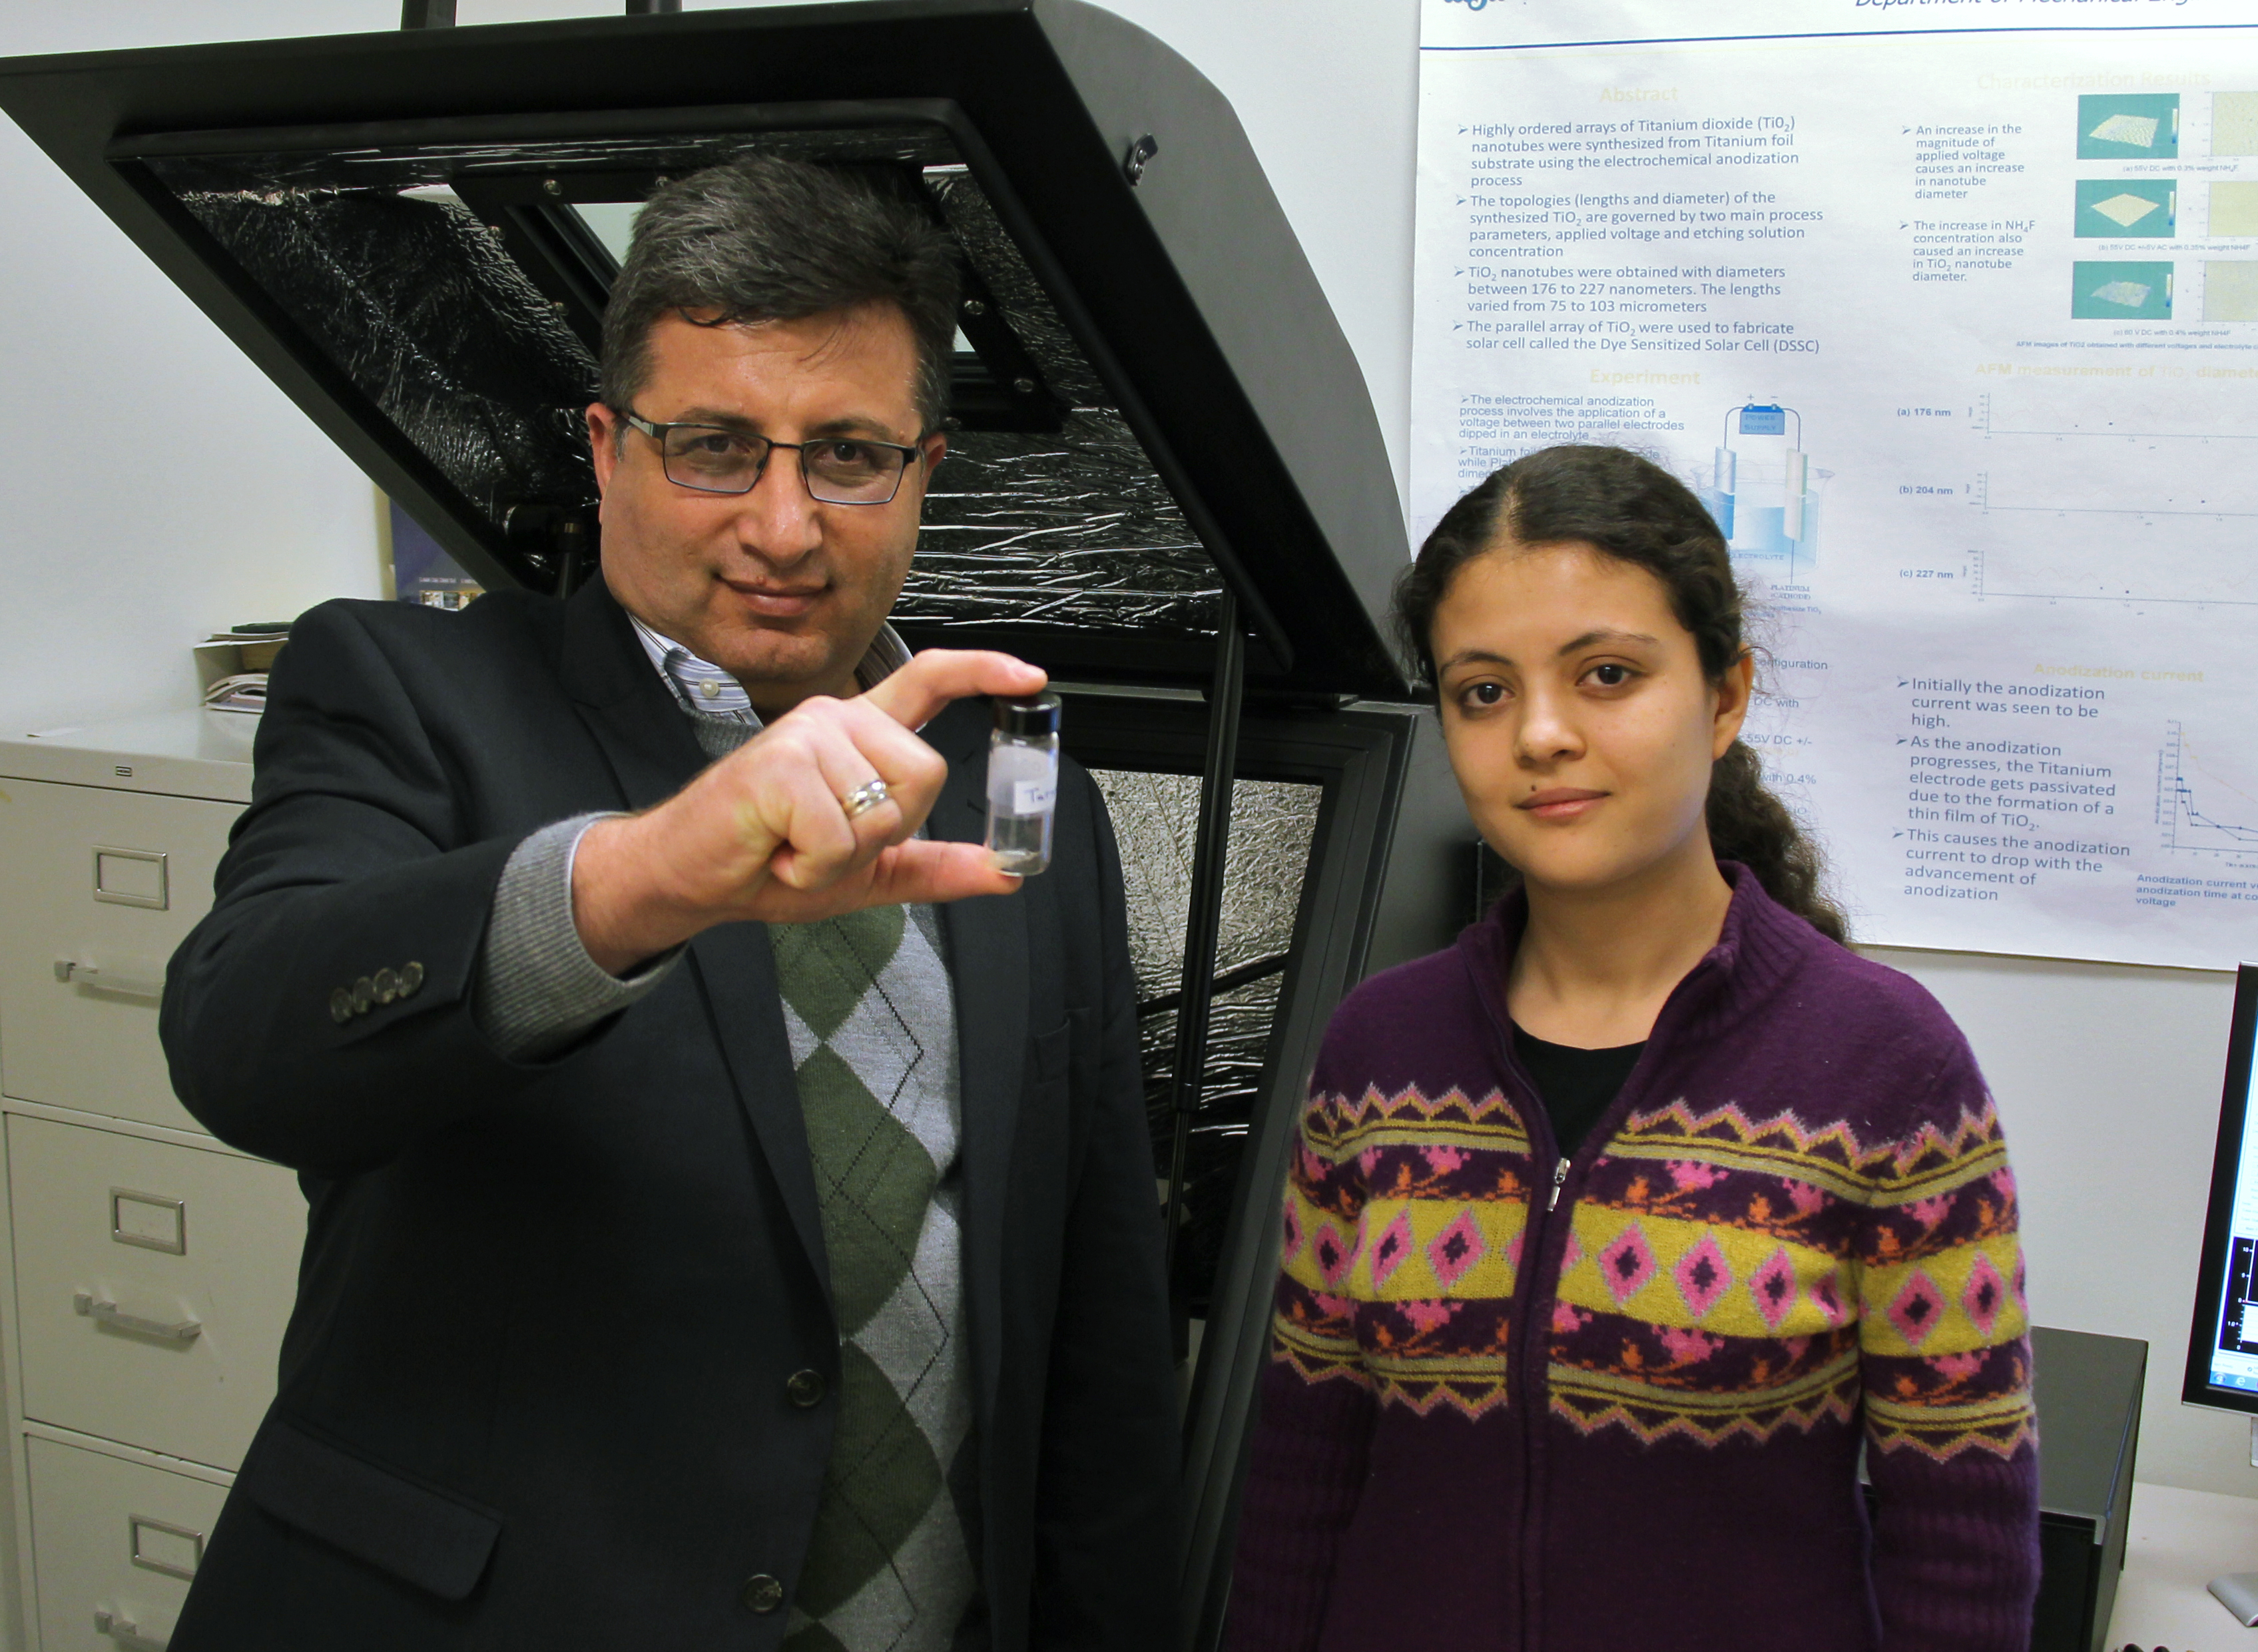 WSU professor Ramazan Asmatulu, left, with grad student Aybala Usta. Along with two other professors, the pair are working on cancer research involving the use of nanoparticles to deliver drugs to tumor sites.